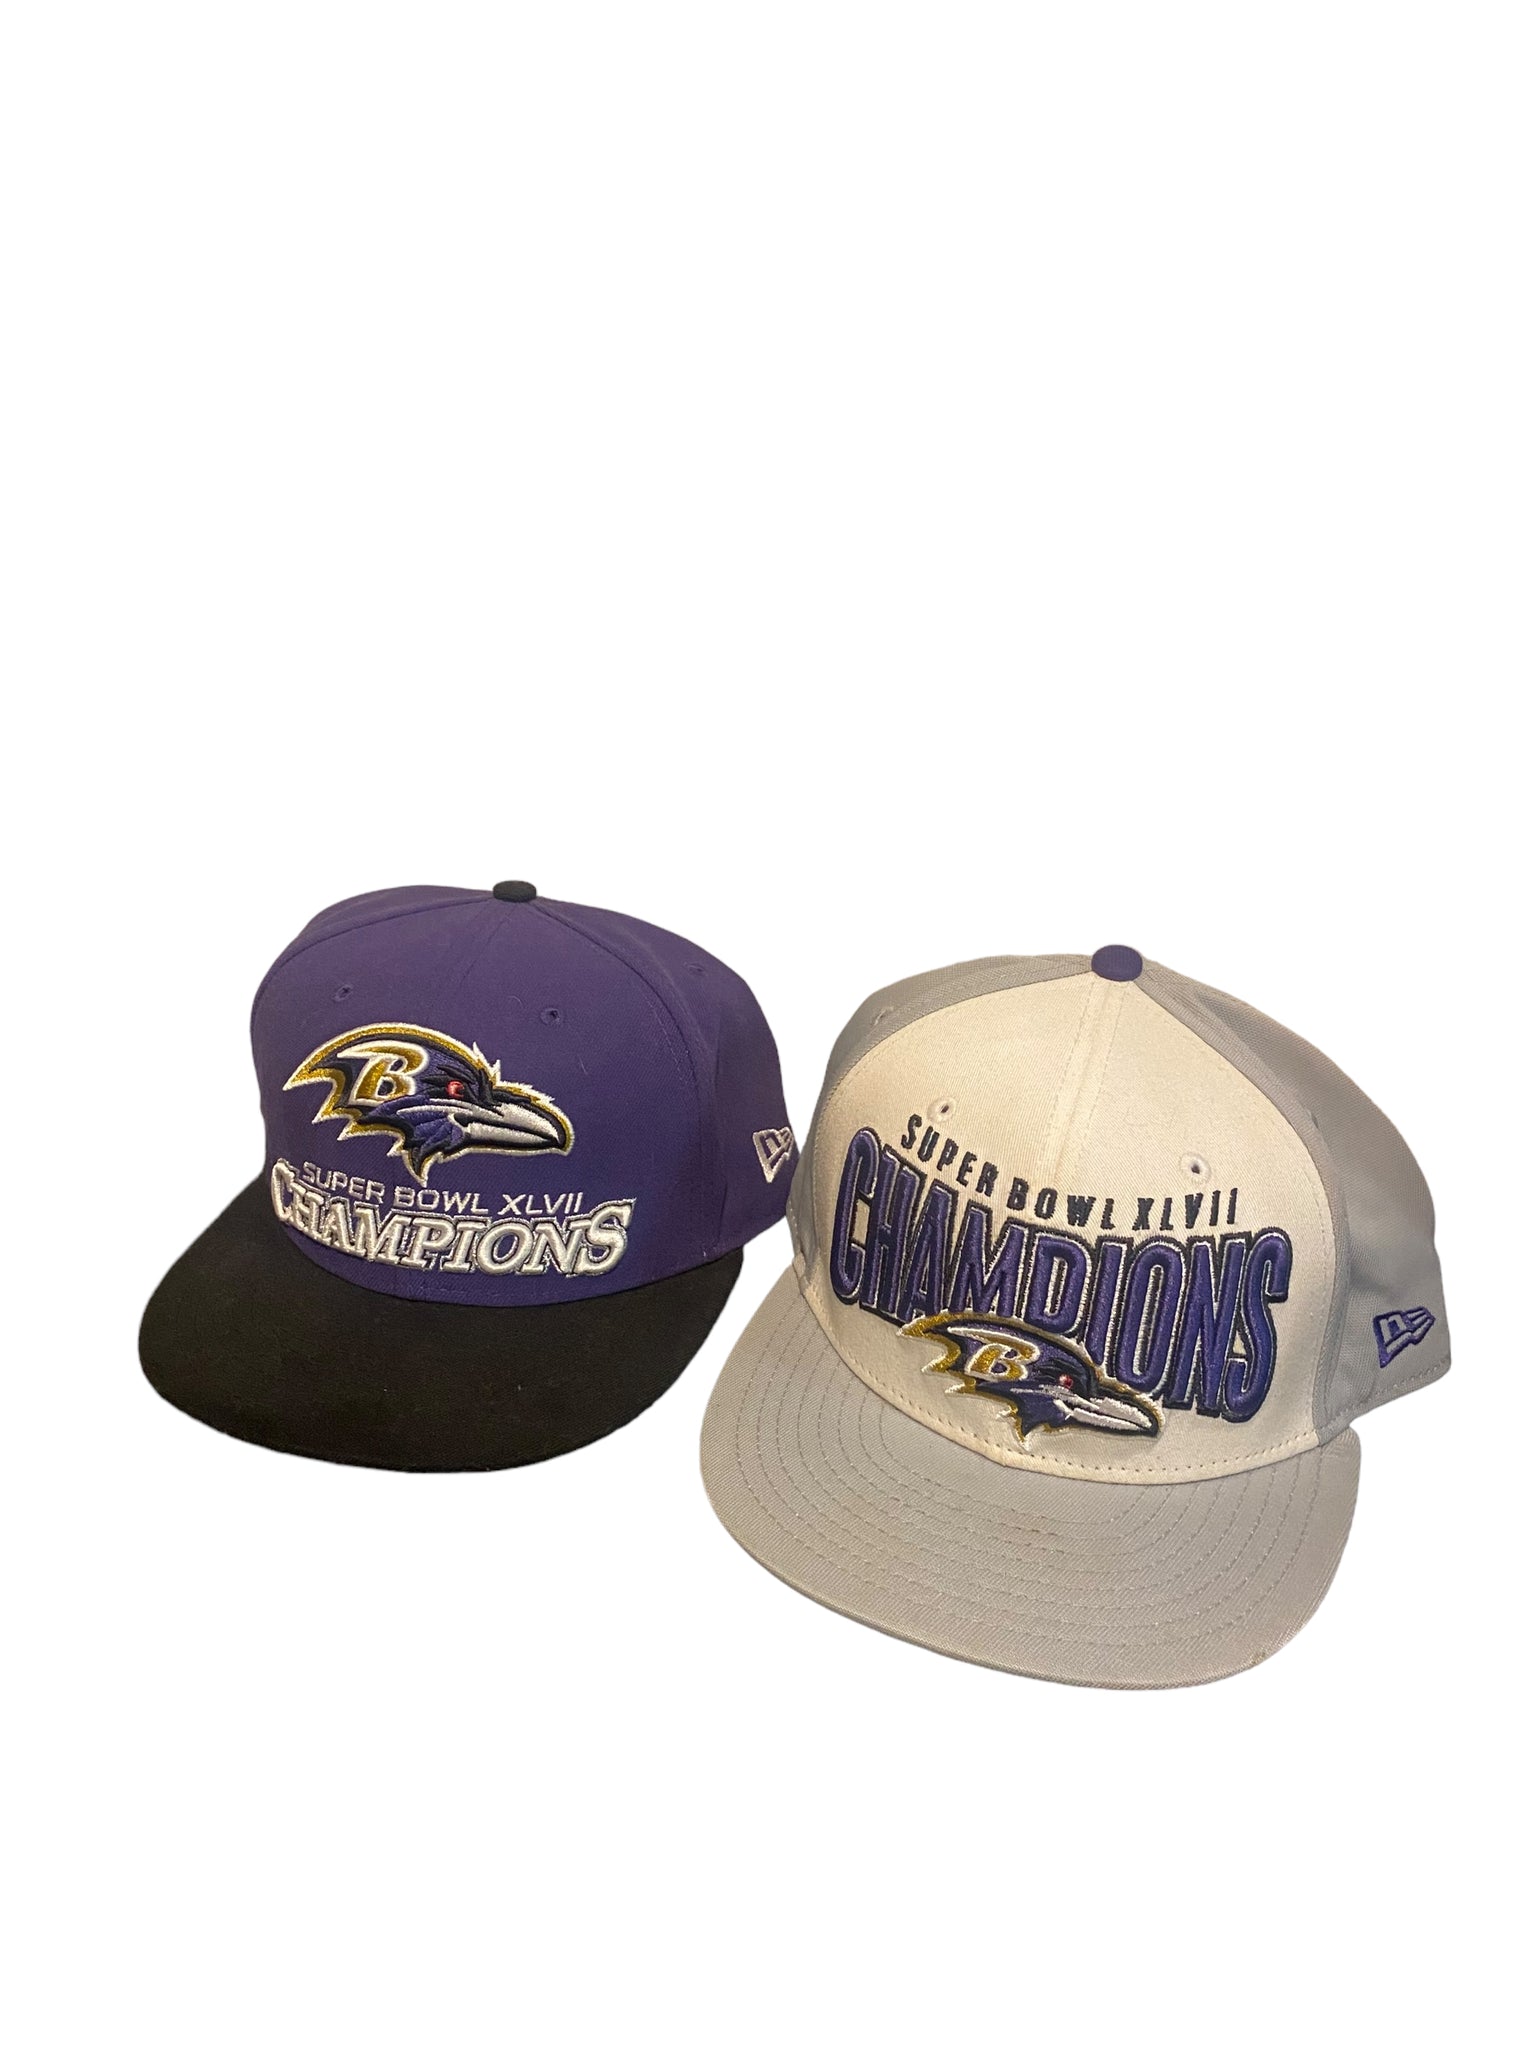 New Era Super Bowl Xlvii Baltimore Ravens Lot Of 2 Fitted Hat Size 7 7/8